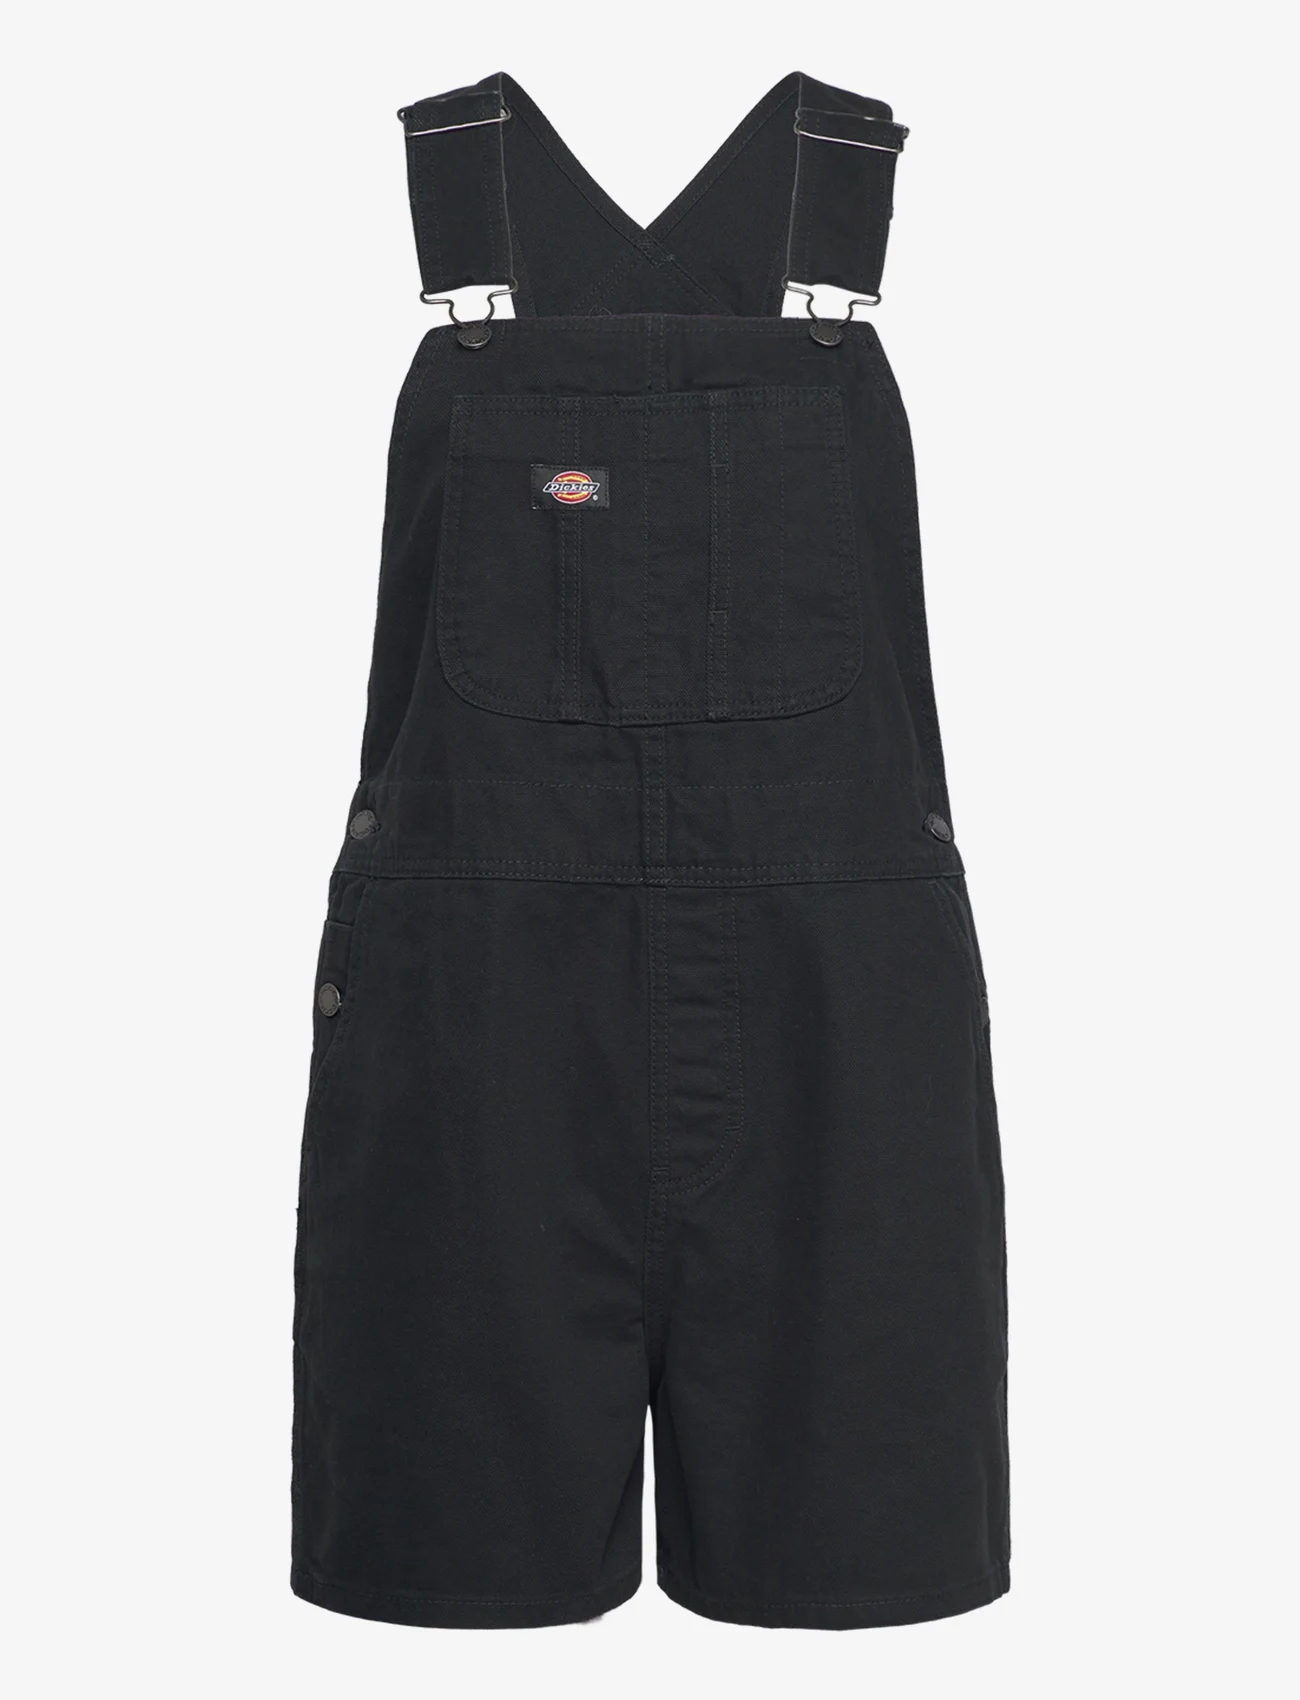 Dickies - DICKIES DUCK CANVAS SHORT BIB W - overalls - stone washed black - 0